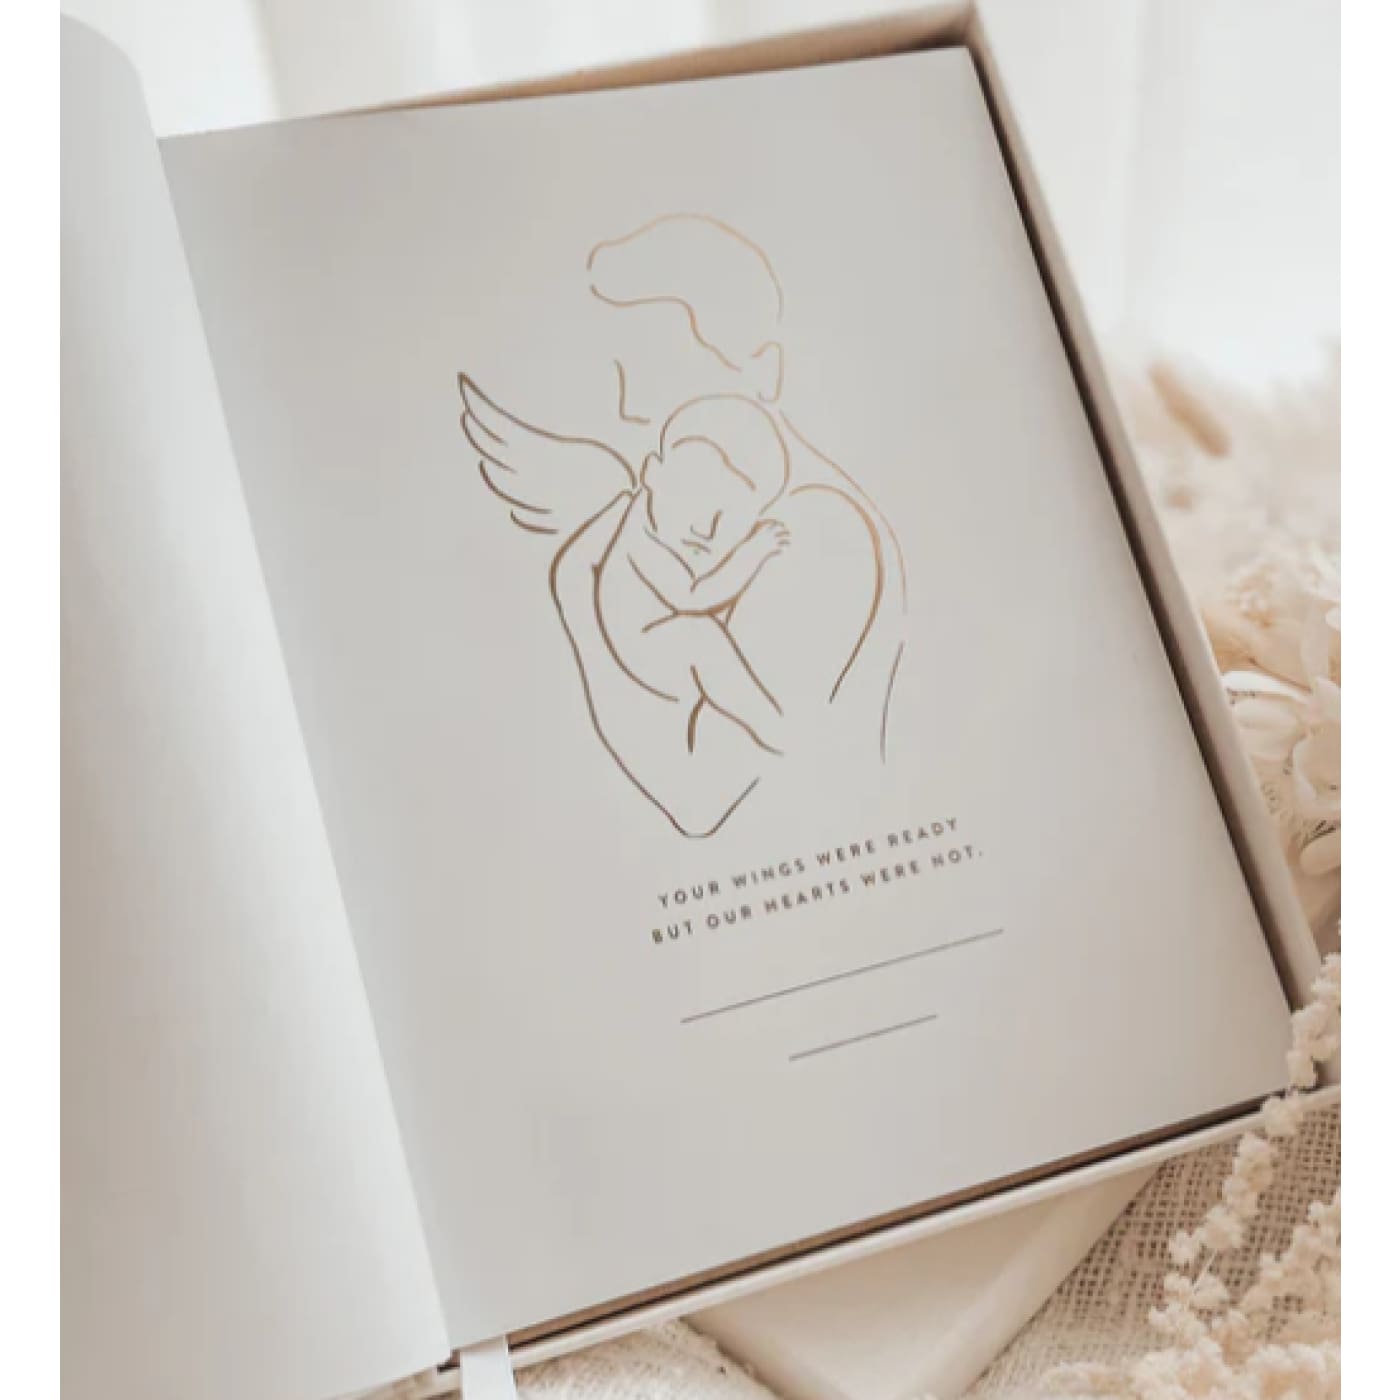 Fox & Fallow Forever In Our Hearts Journal - GIFTWARE - KEEPSAKES